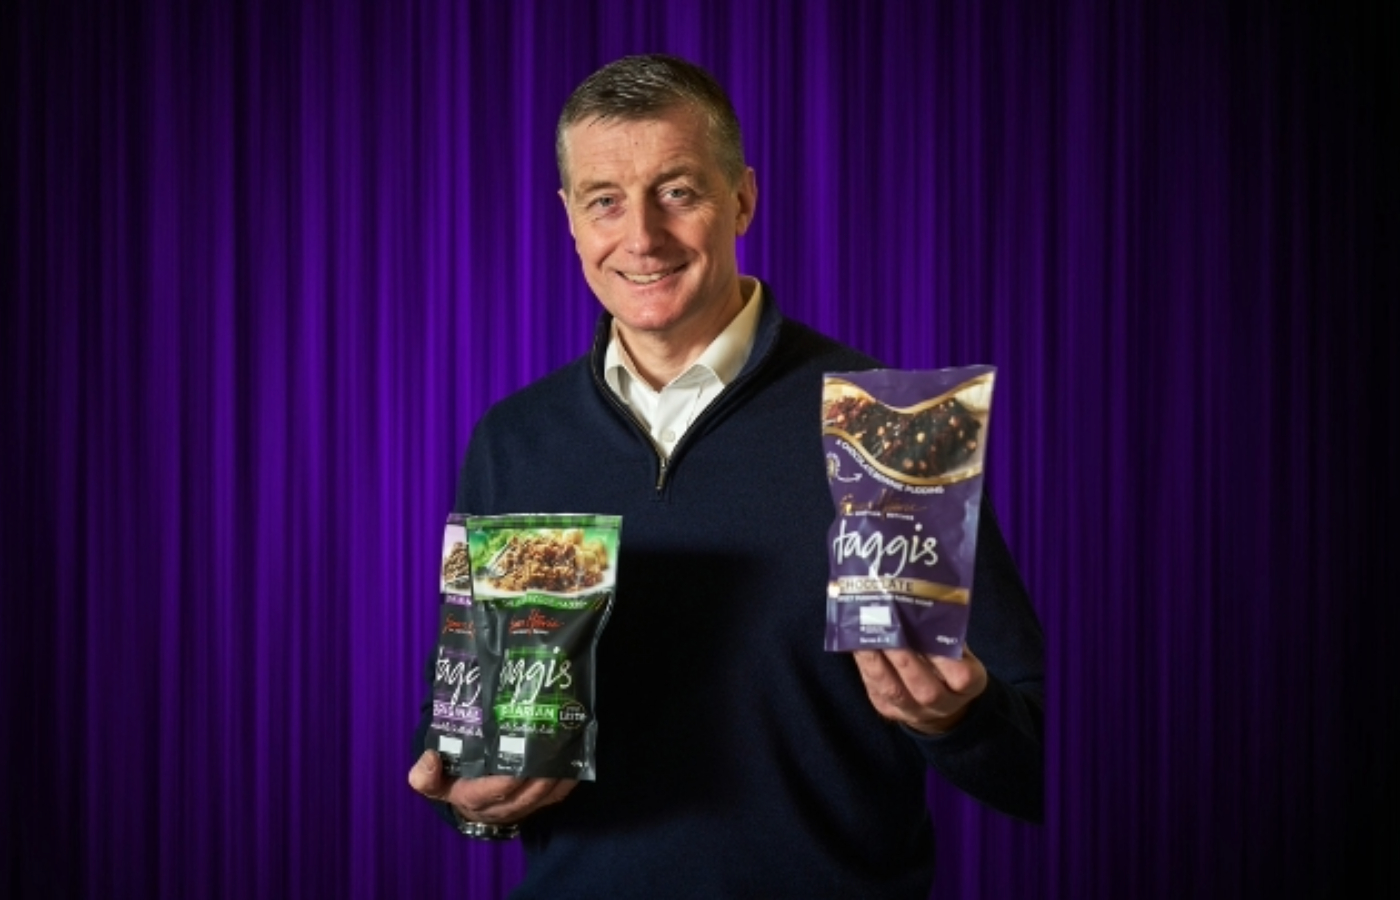 Simon Howie unveiled the company's first dessert product ahead of Burns Night. Photo: Simon Howie.